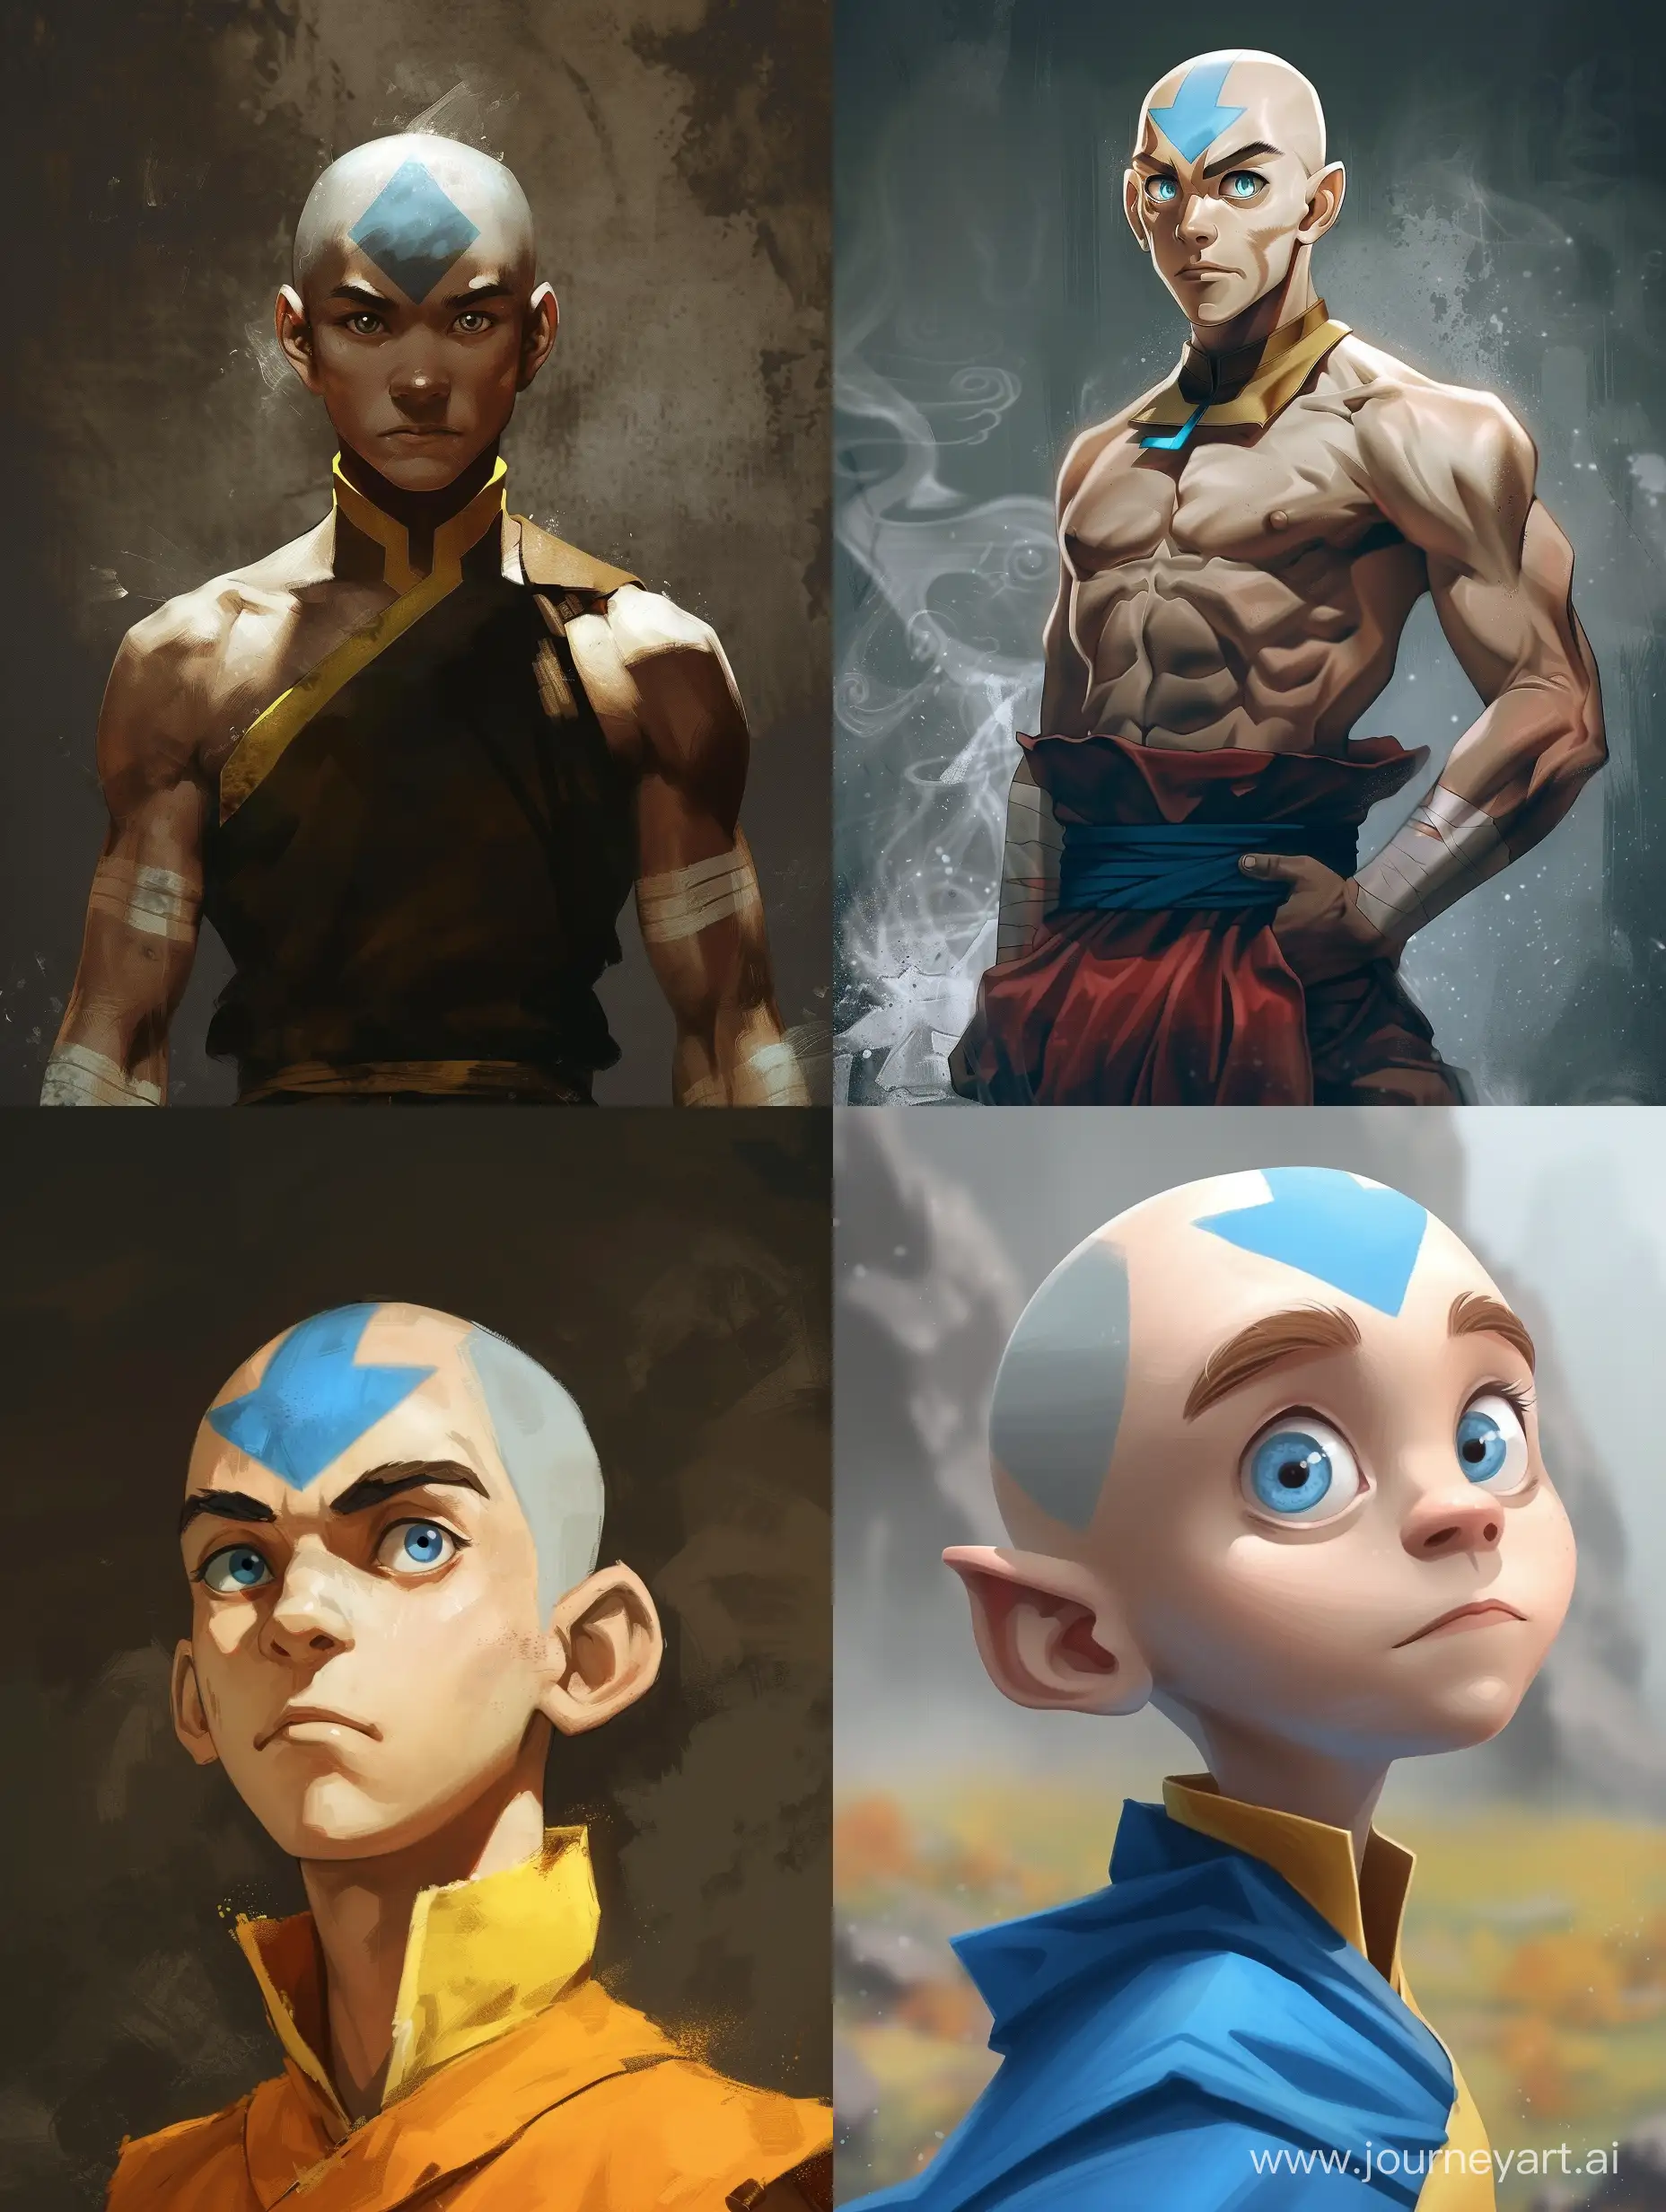 Realistic-Full-Body-Avatar-Aang-Master-of-the-Elements-in-34-Aspect-Ratio